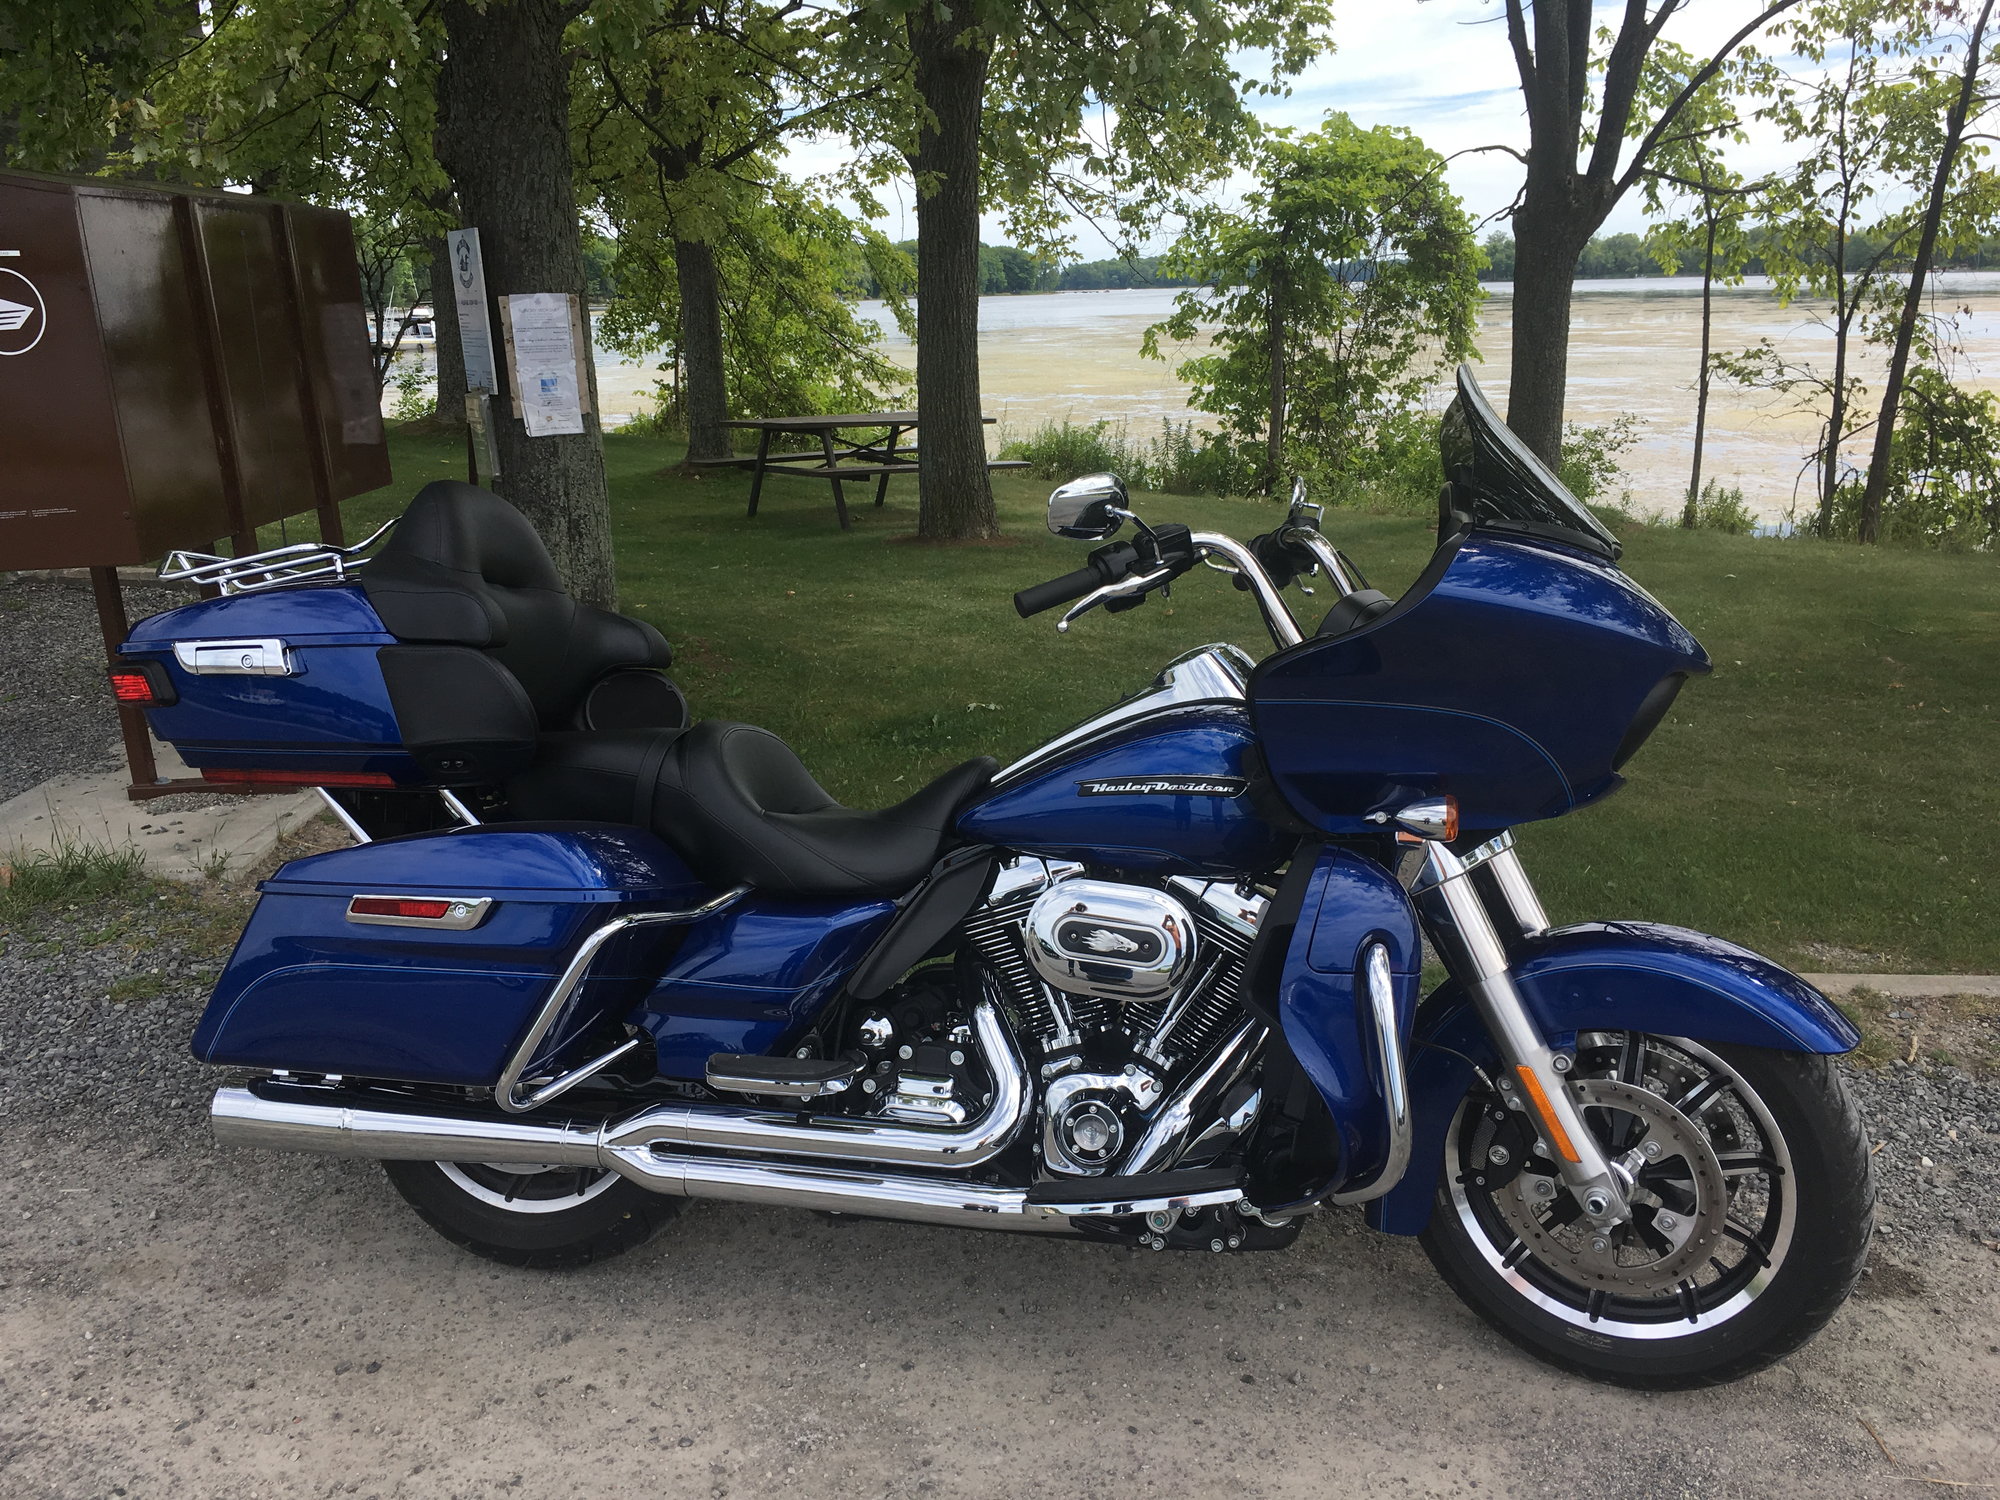 Road Glide stock windshield height Harley Davidson Forums